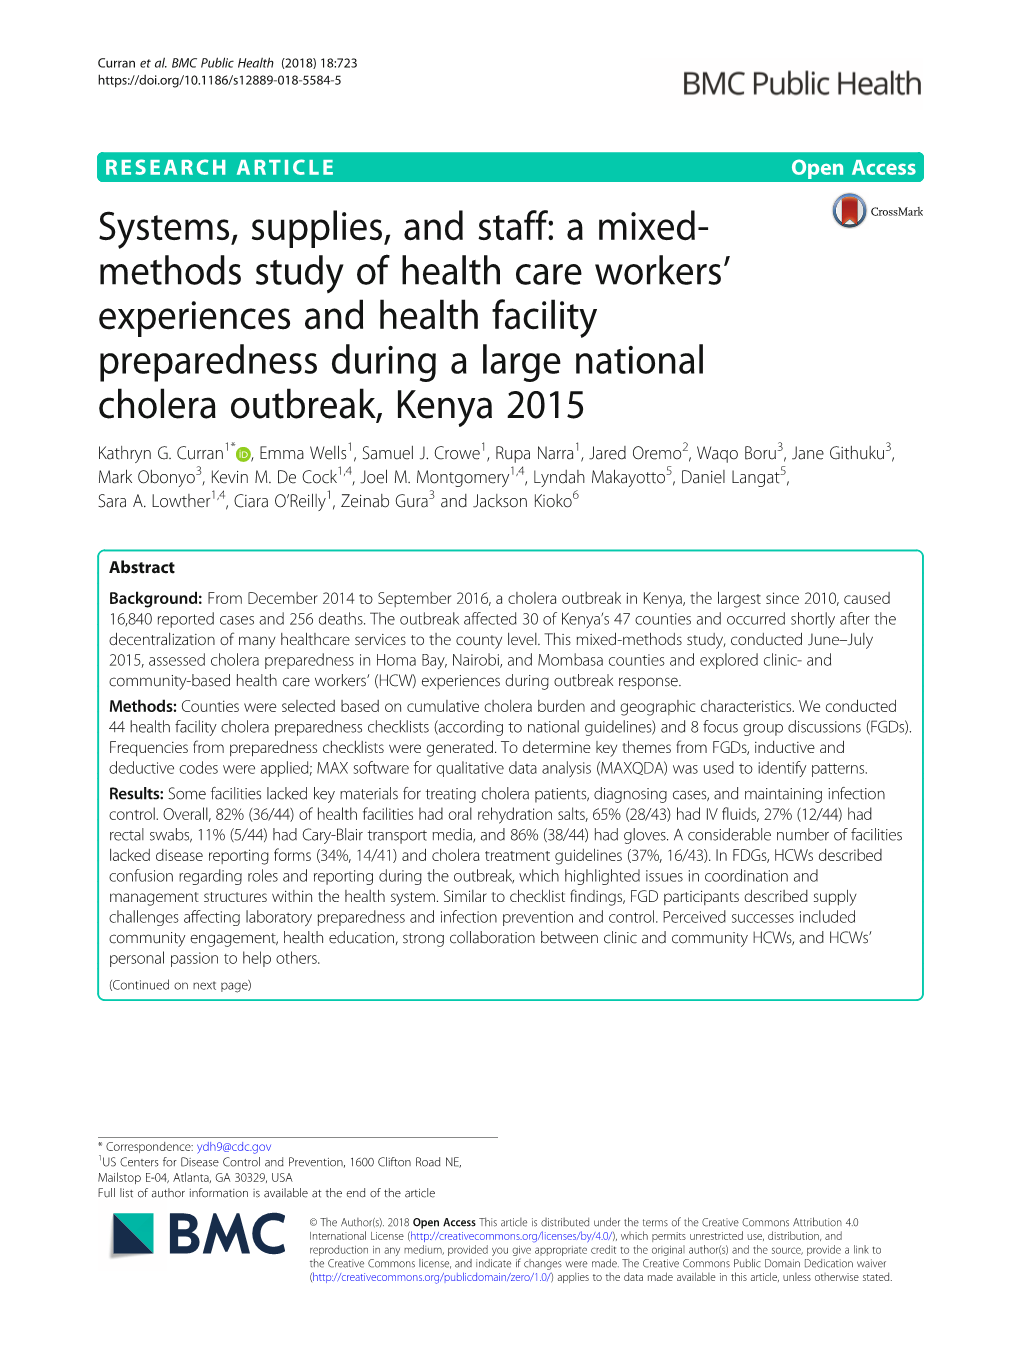 Methods Study of Health Care Workers' Experiences and Health Facility Preparedness During a Large National Cholera Outbreak, Kenya 2015